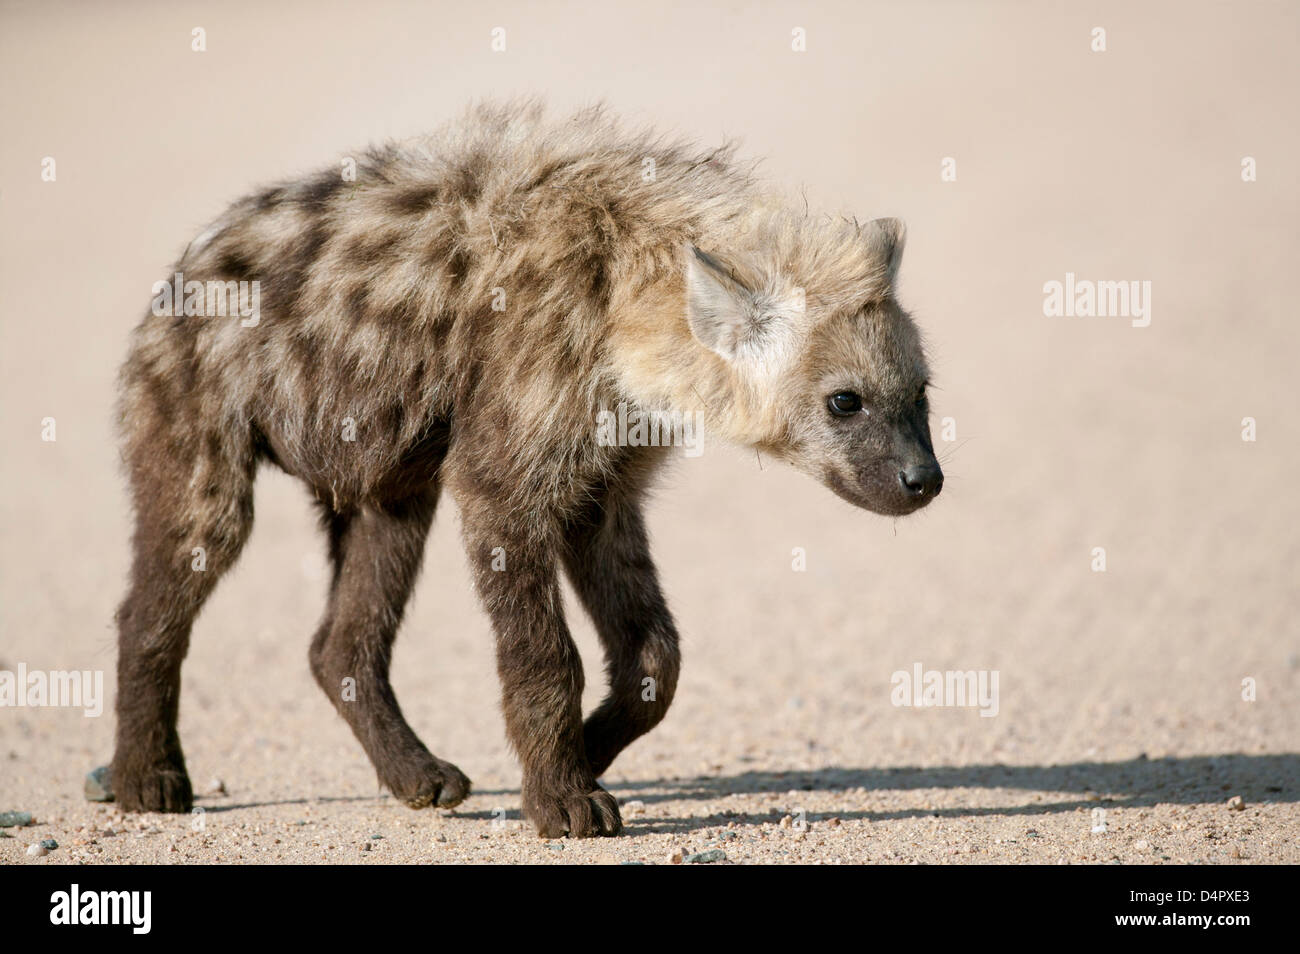 Young Spotted hyena Crocuta crocuta out on a journey of self discovery Stock Photo